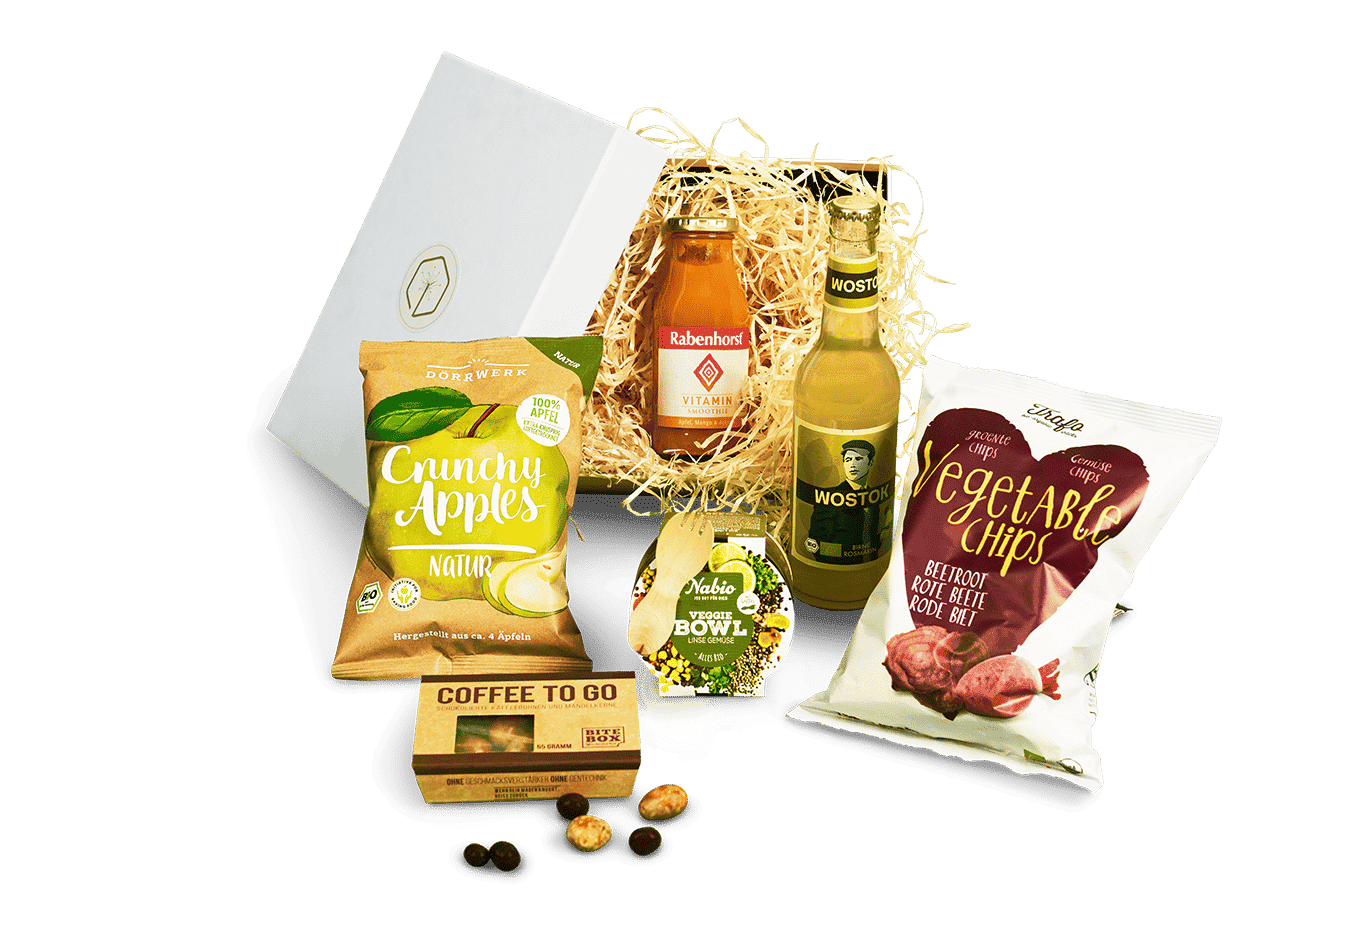 With a revitalising vitamin smoothie, delicious pear and rosemary lemonade, crispy apple chips, crunchy vegetable chips, a delicious coffee-to-go nut mix and a healthy veggie bowl, you'll make the recipients of the lunch box a real treat!